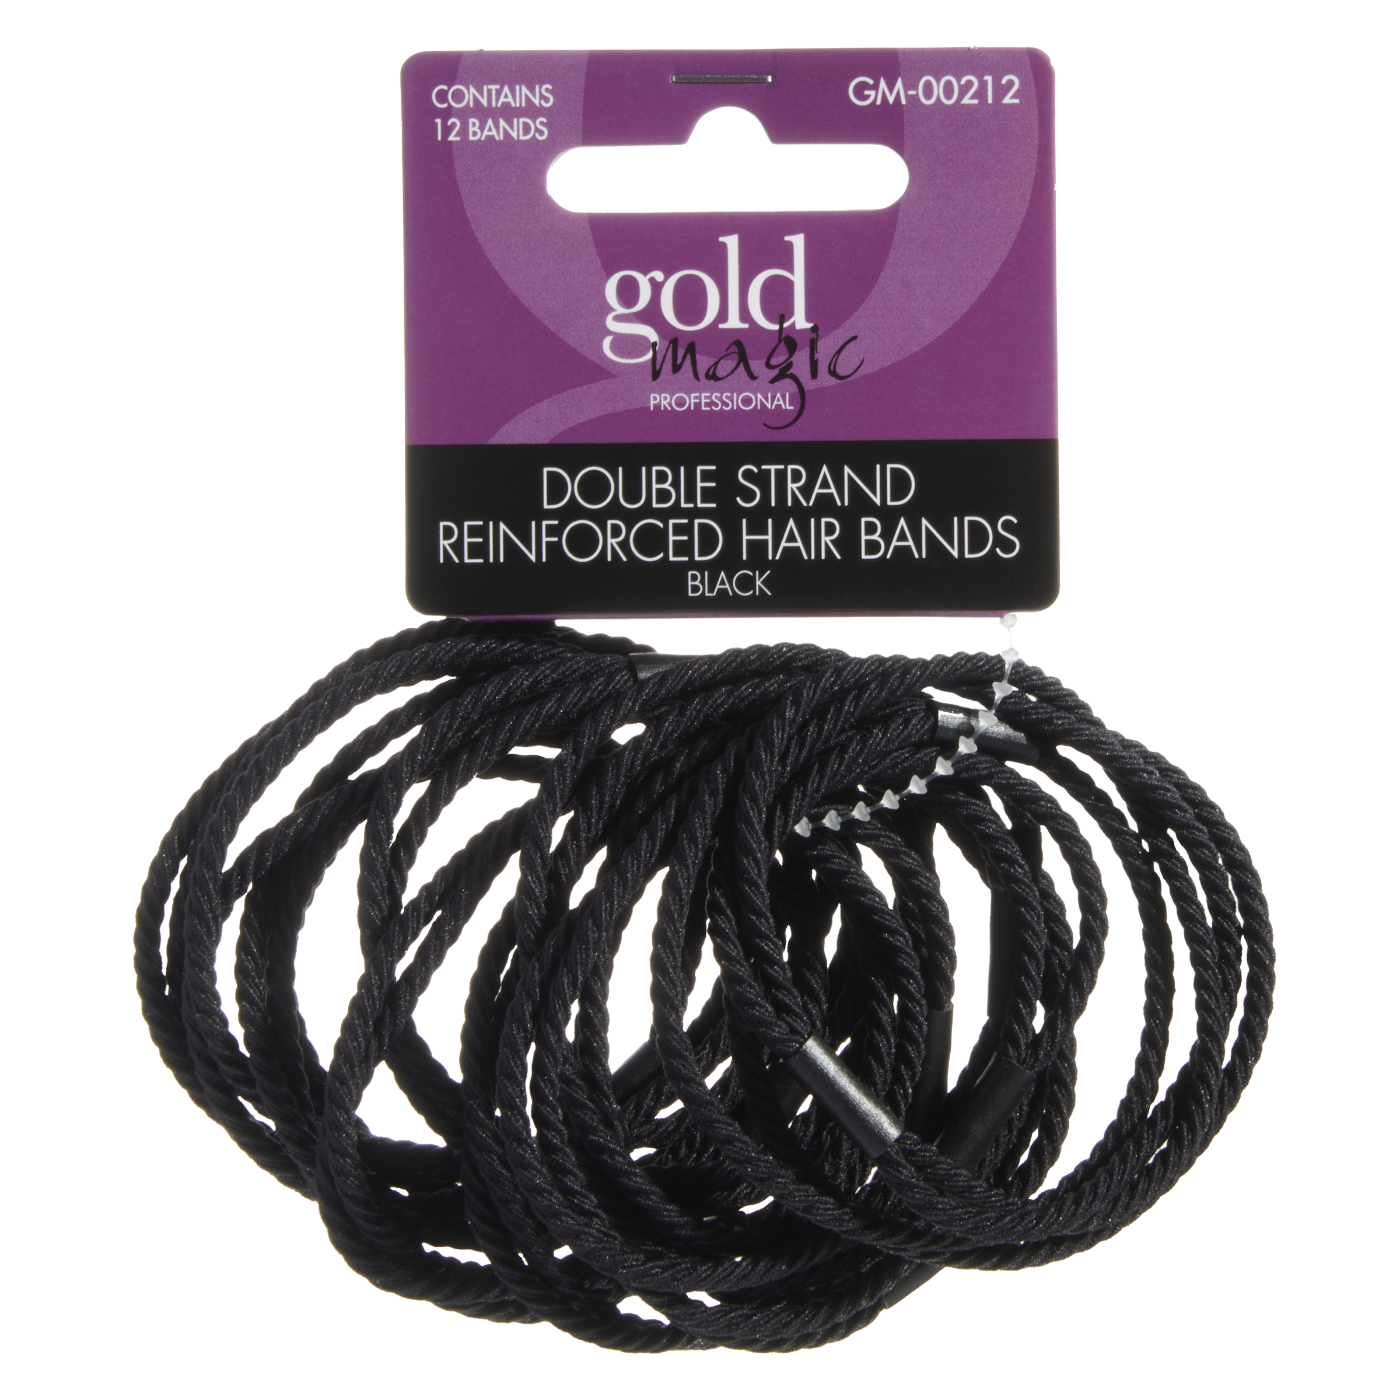 Reinforced Hair Bands - Double Strand, 12 pk.